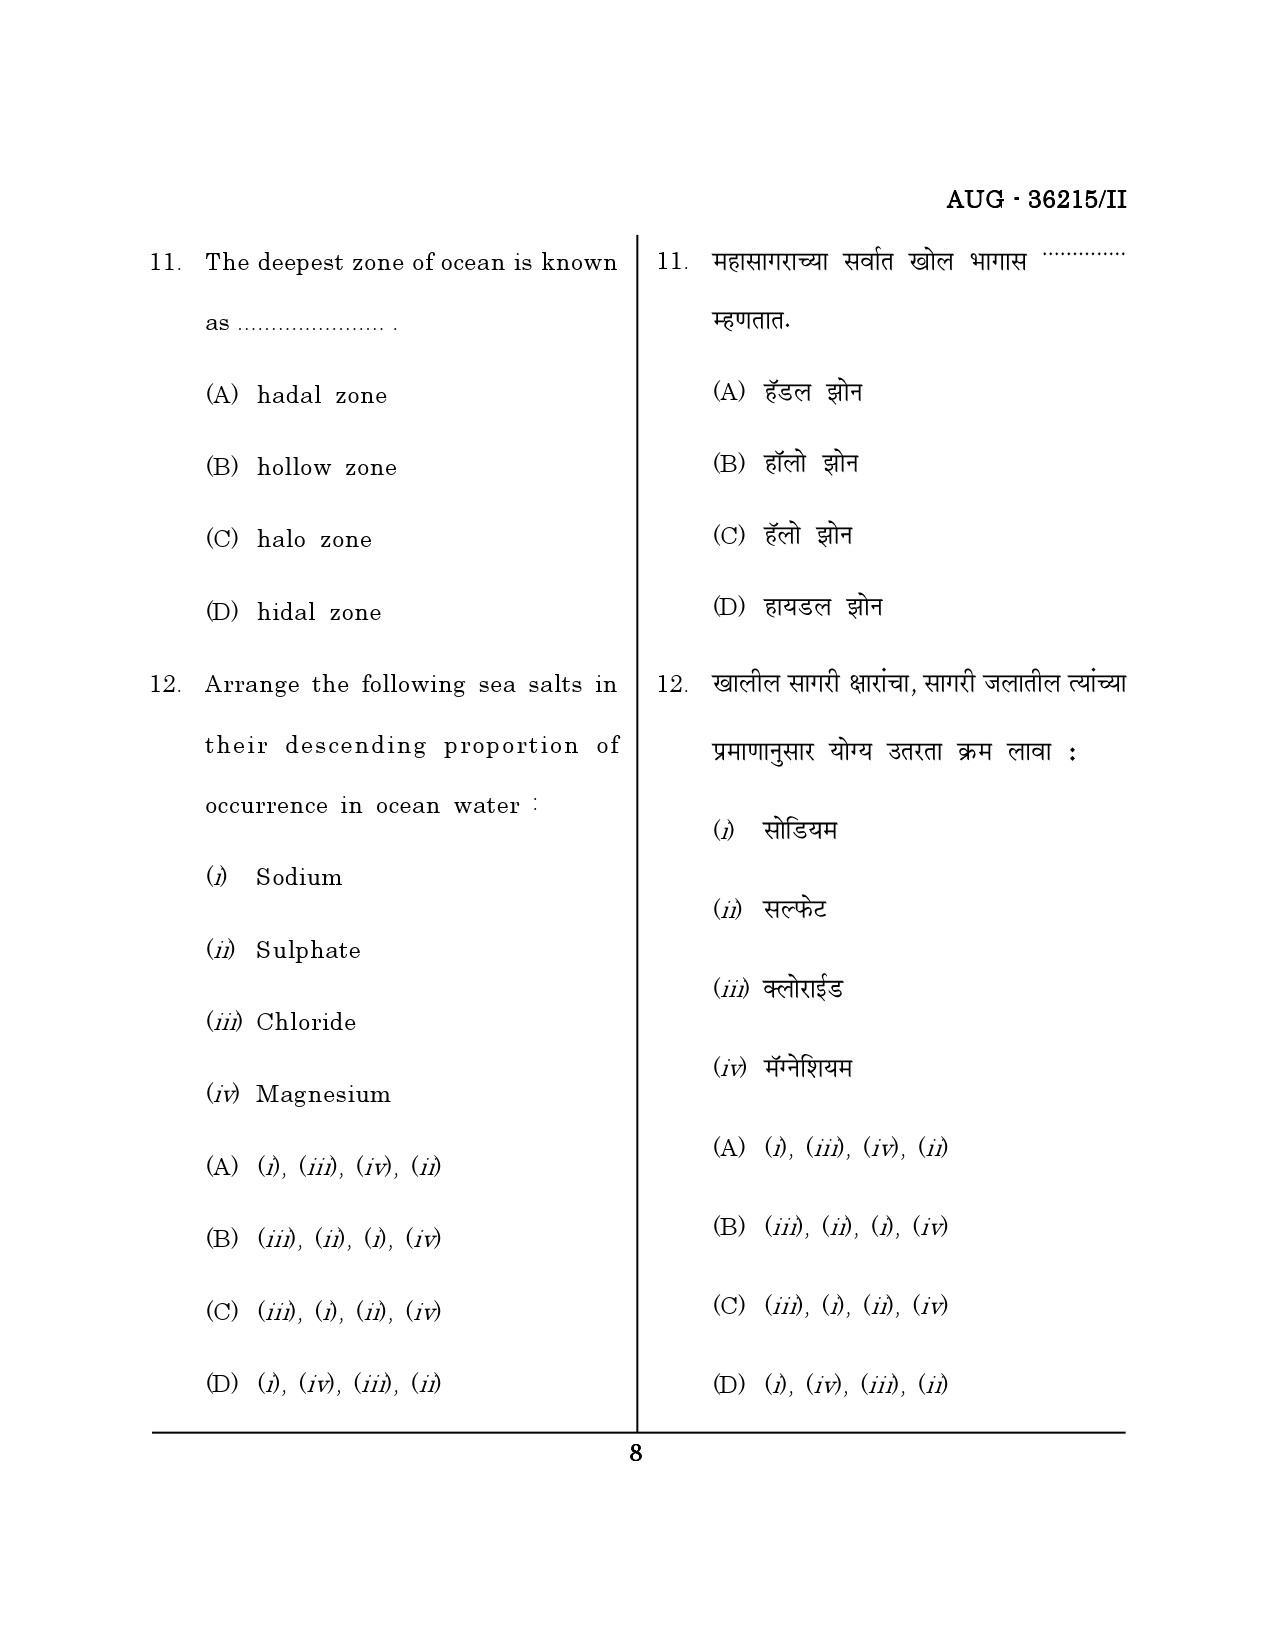 Maharashtra SET Geography Question Paper II August 2015 7